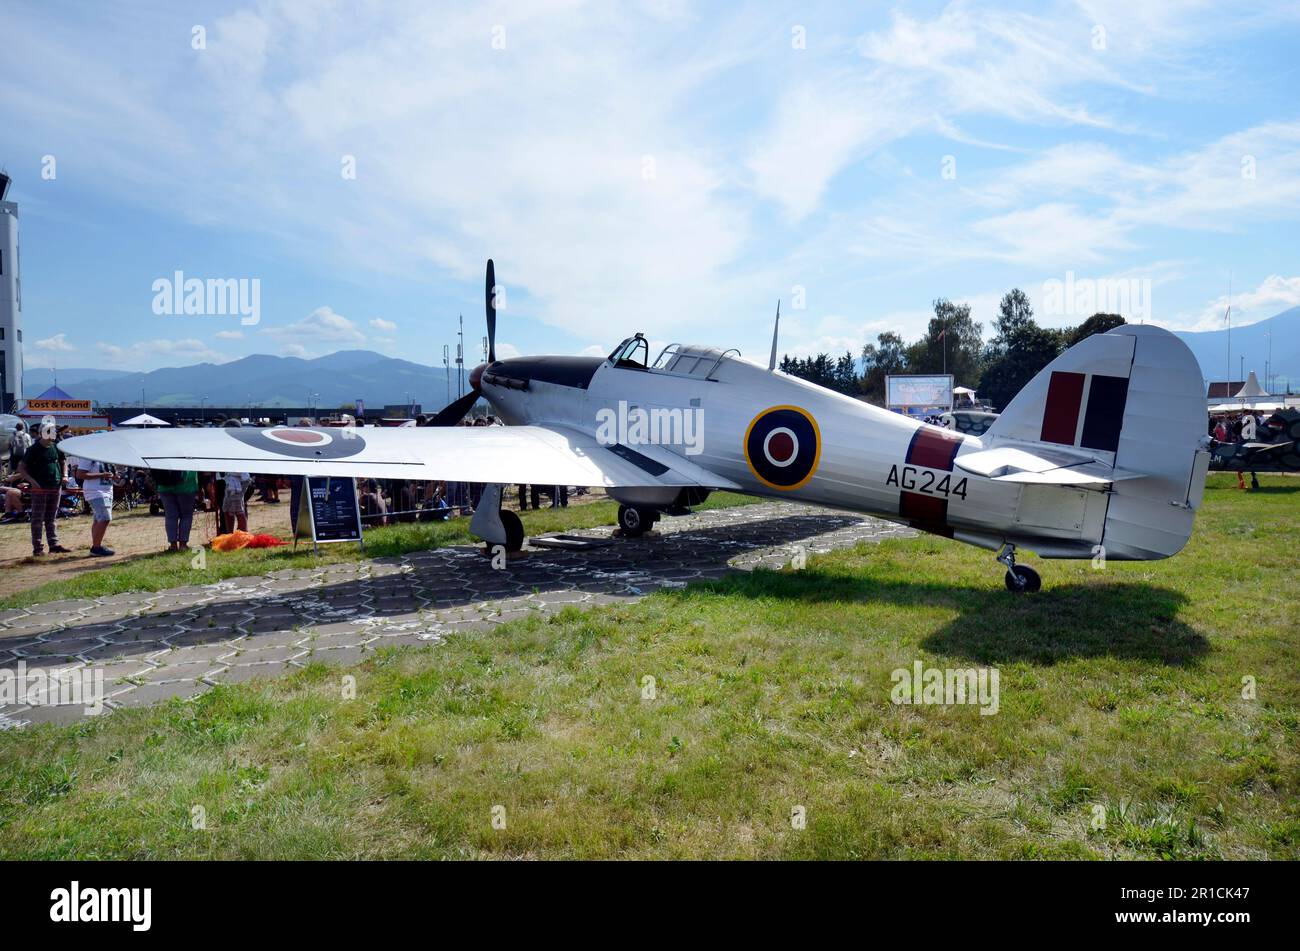 Zeltweg, Austria - September 03, 2022: Public airshow in Styria named Airpower 22, vintage Hawker Hurricane, British fighter aircraft from WWII Stock Photo